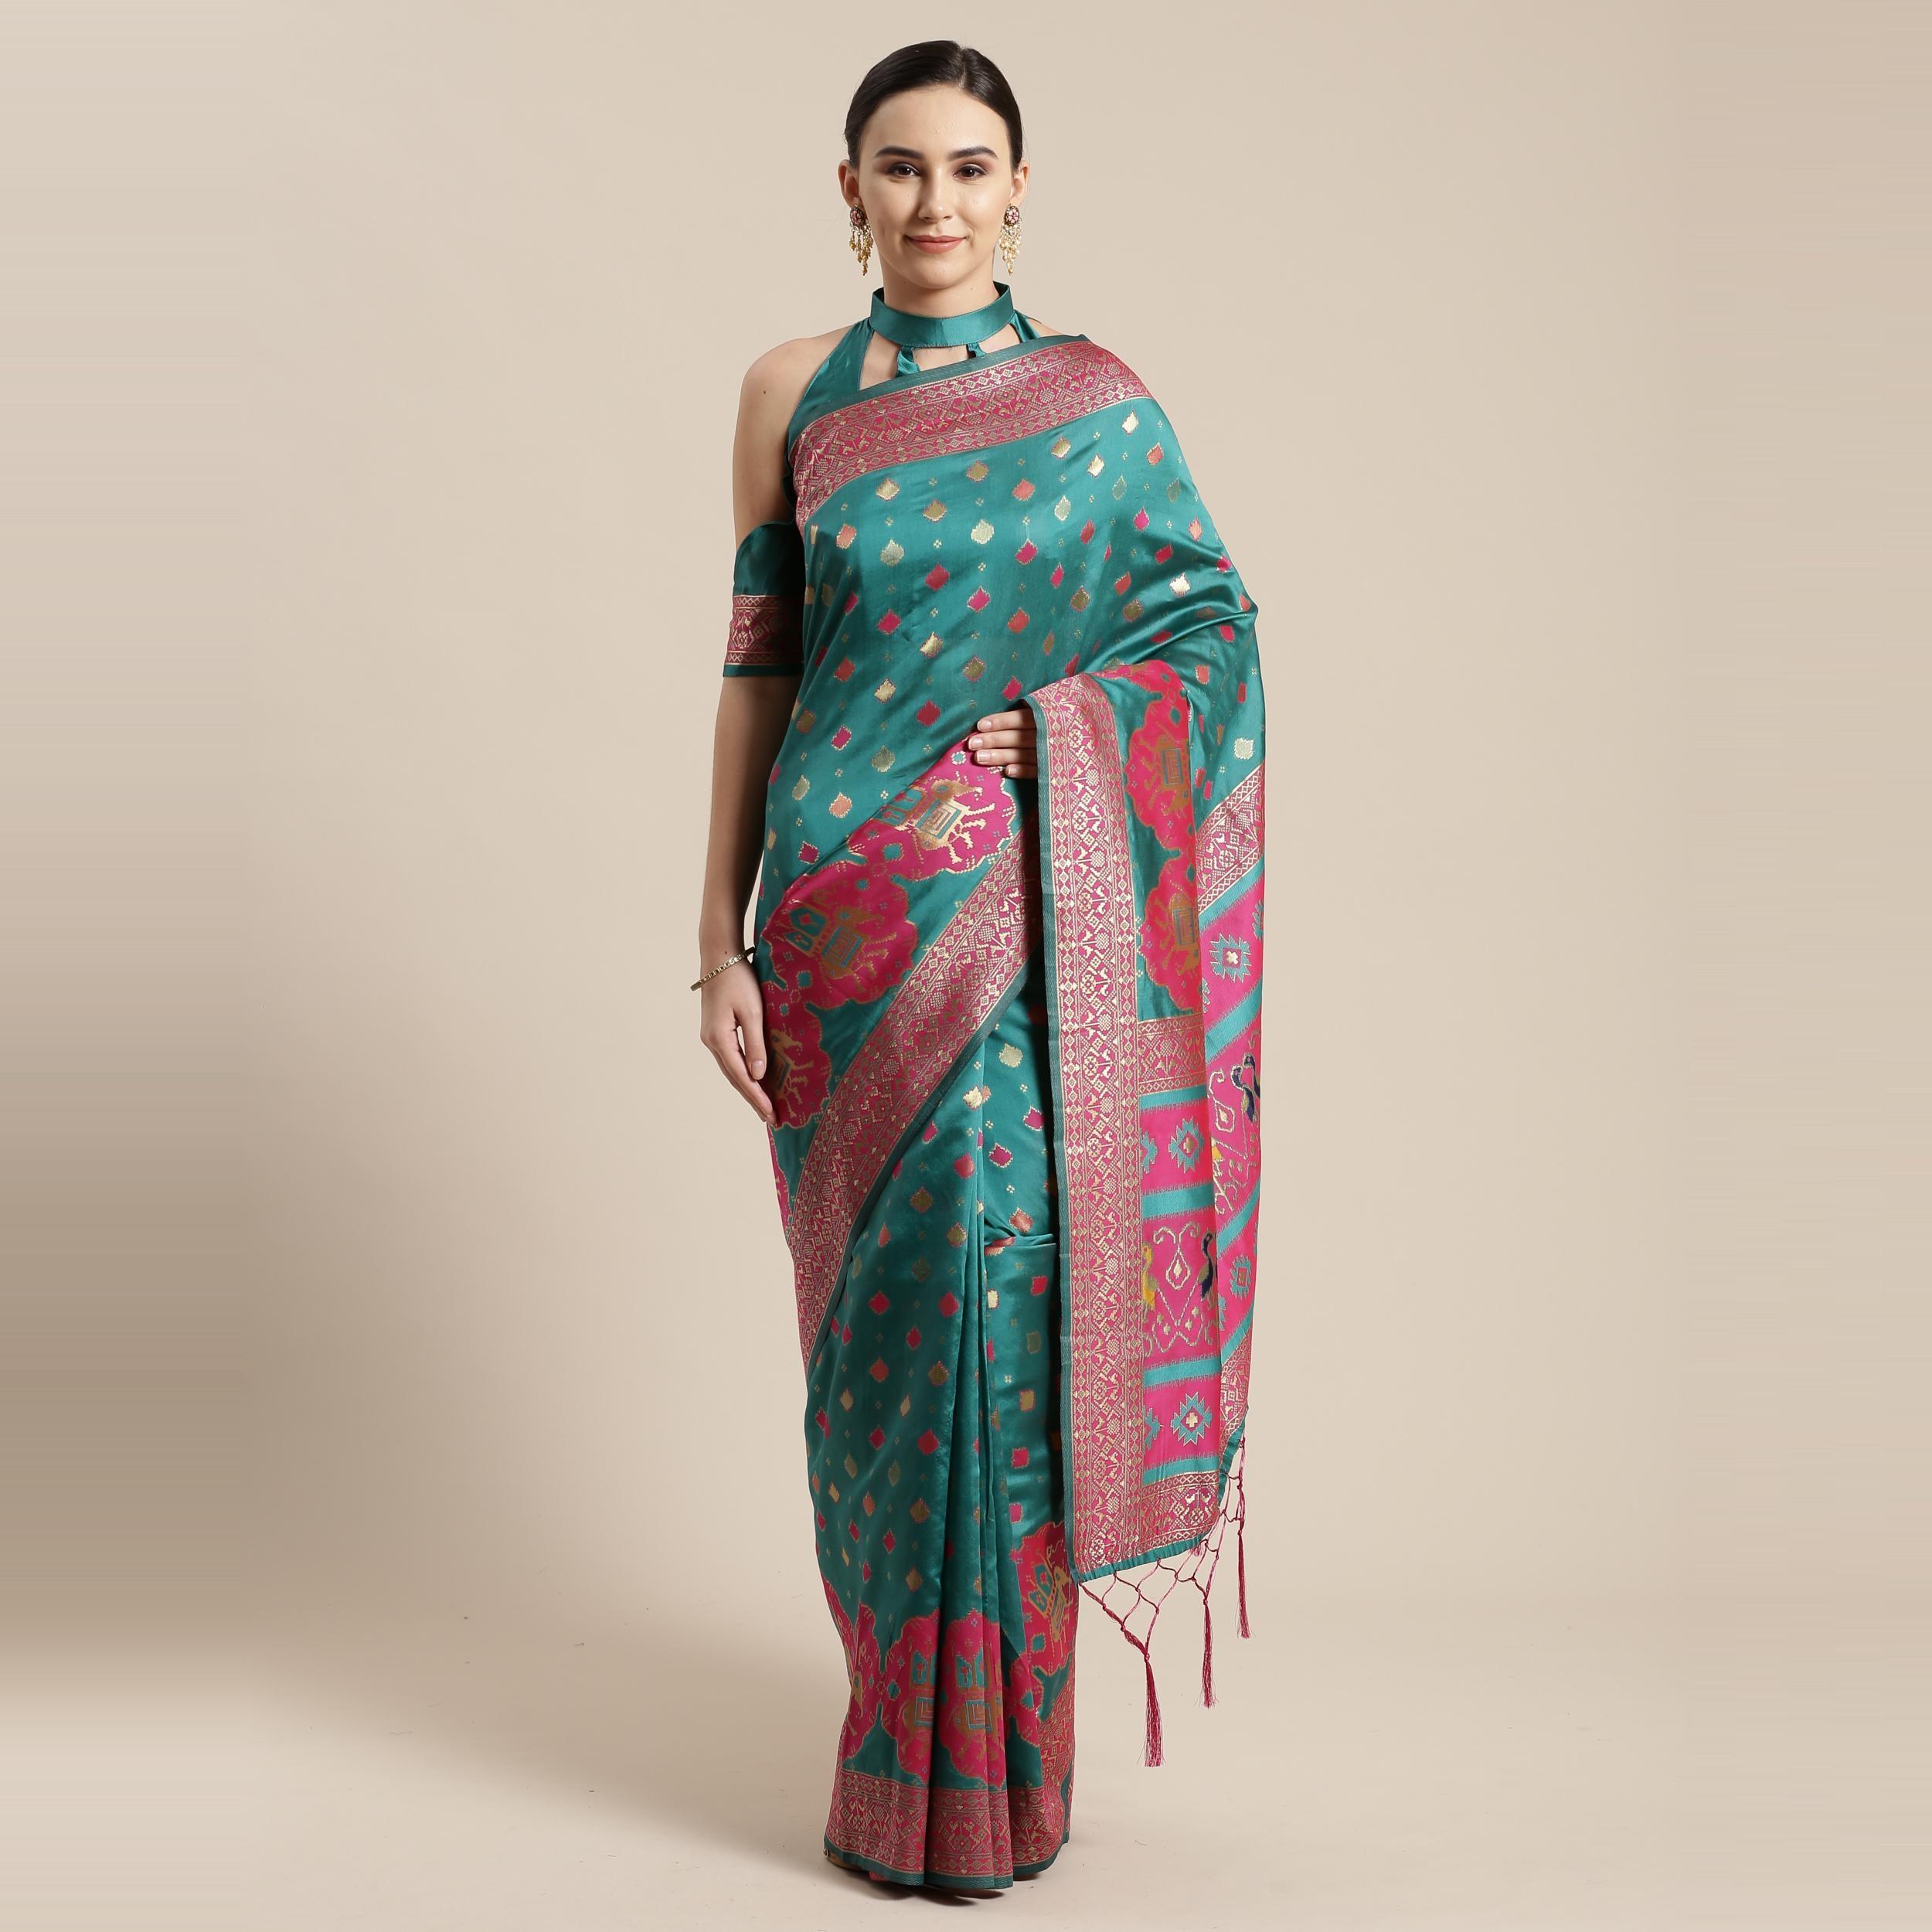 Refreshing Teal Green Colored Festive Wear Woven Silk Belnd Saree With Tassels - Peachmode